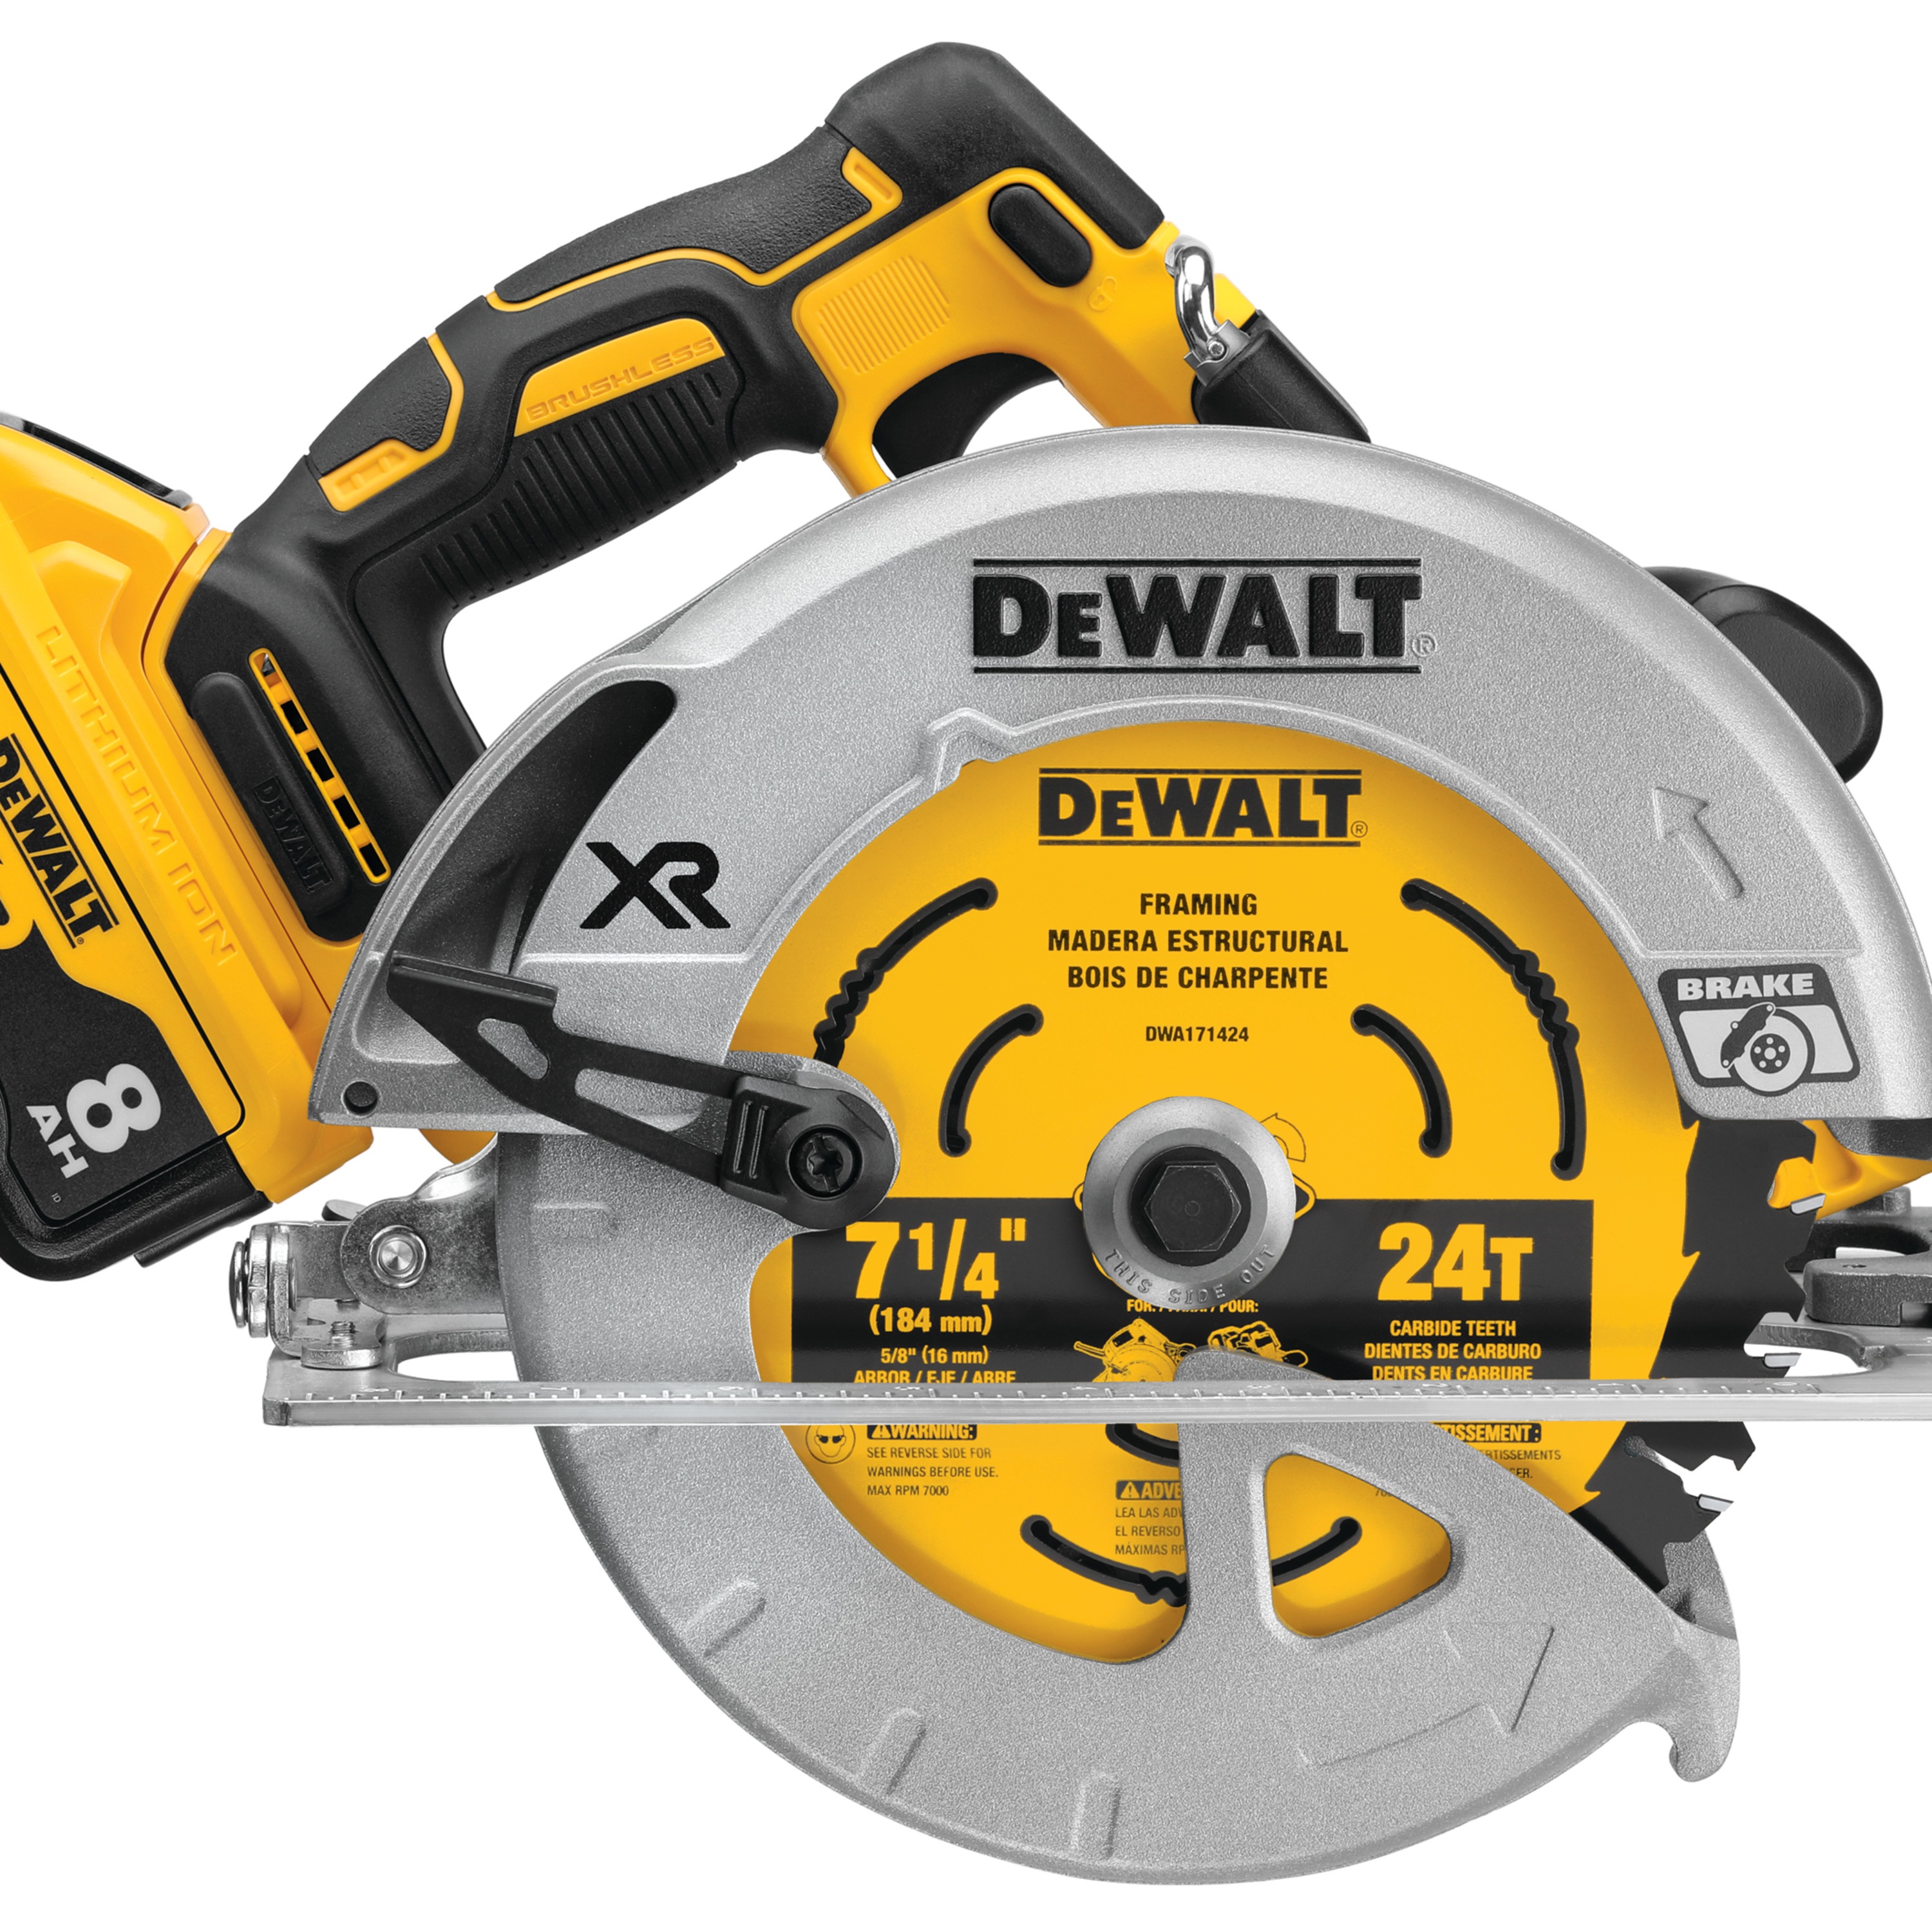 XR brushless circular saw with POWER DETECT tool technology.